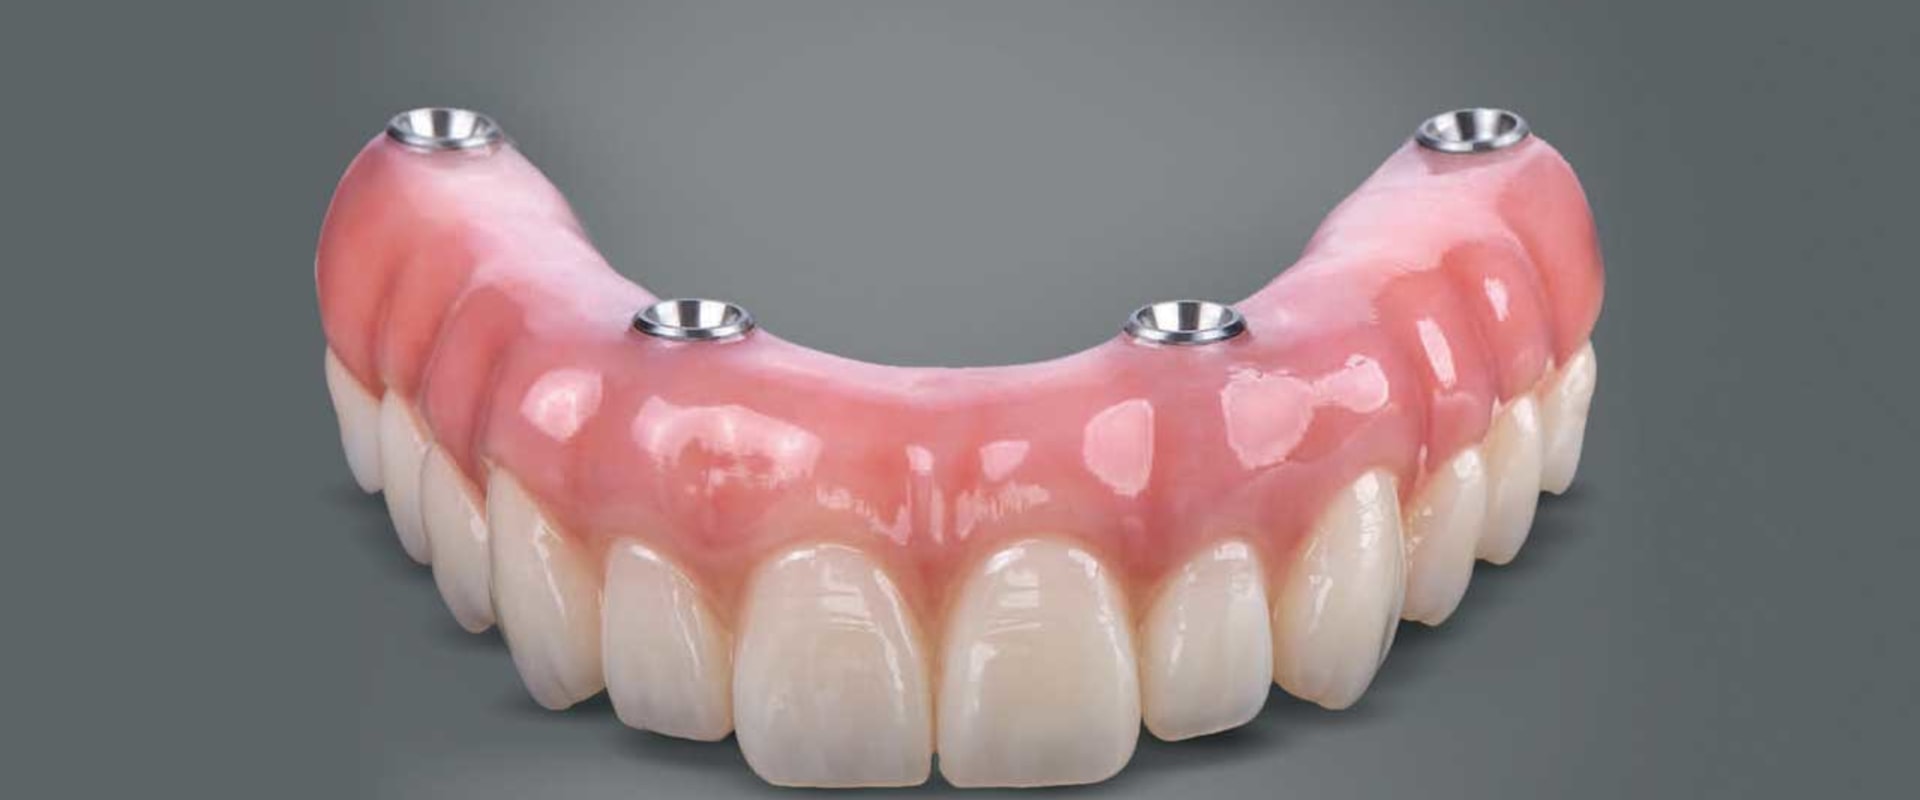 What Materials are Used to Make All-on-Four Dentures?